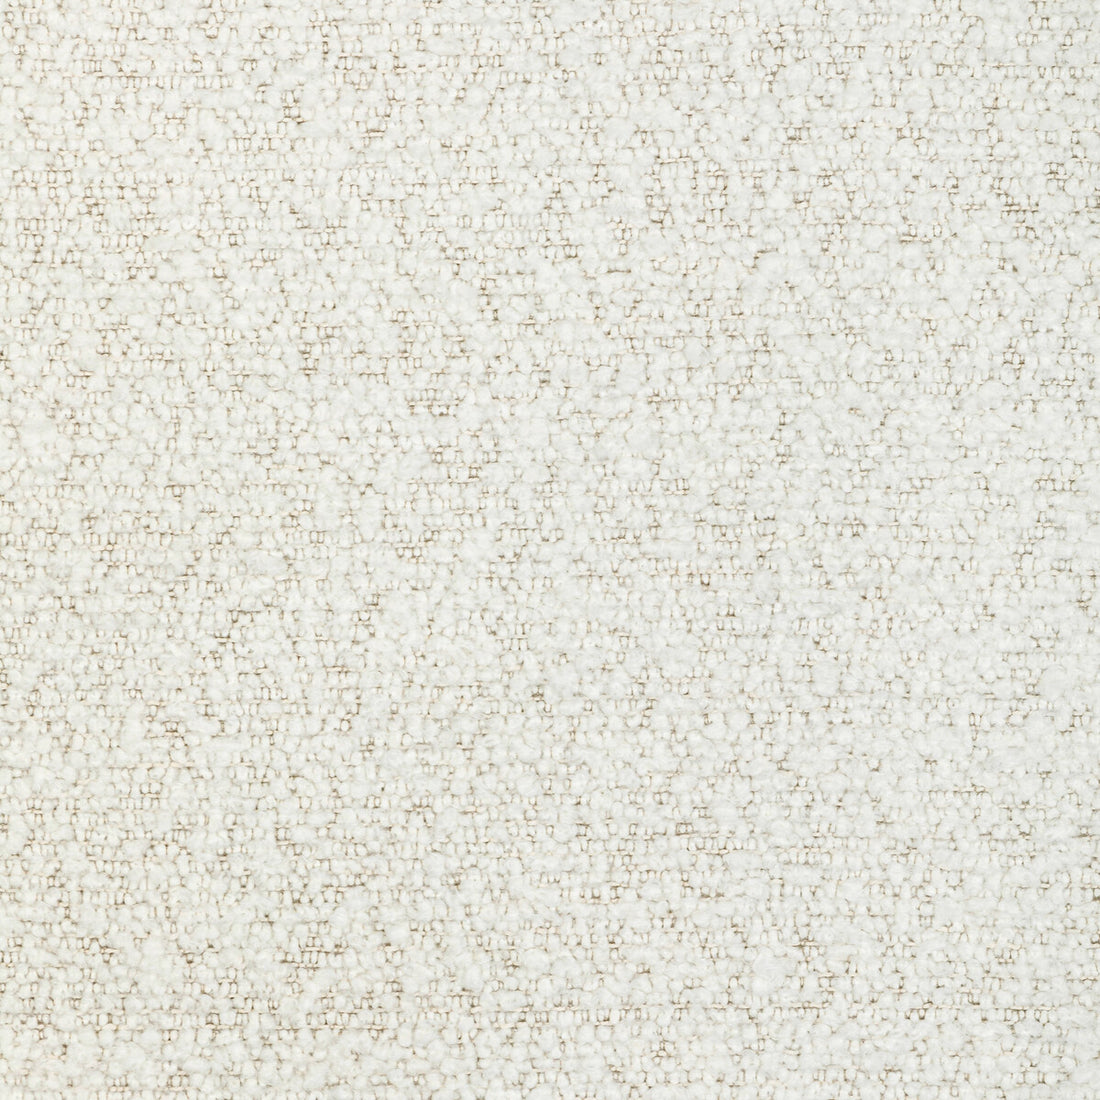 Sensual Boucle fabric in cream color - pattern 36782.111.0 - by Kravet Design in the Candice Olson collection